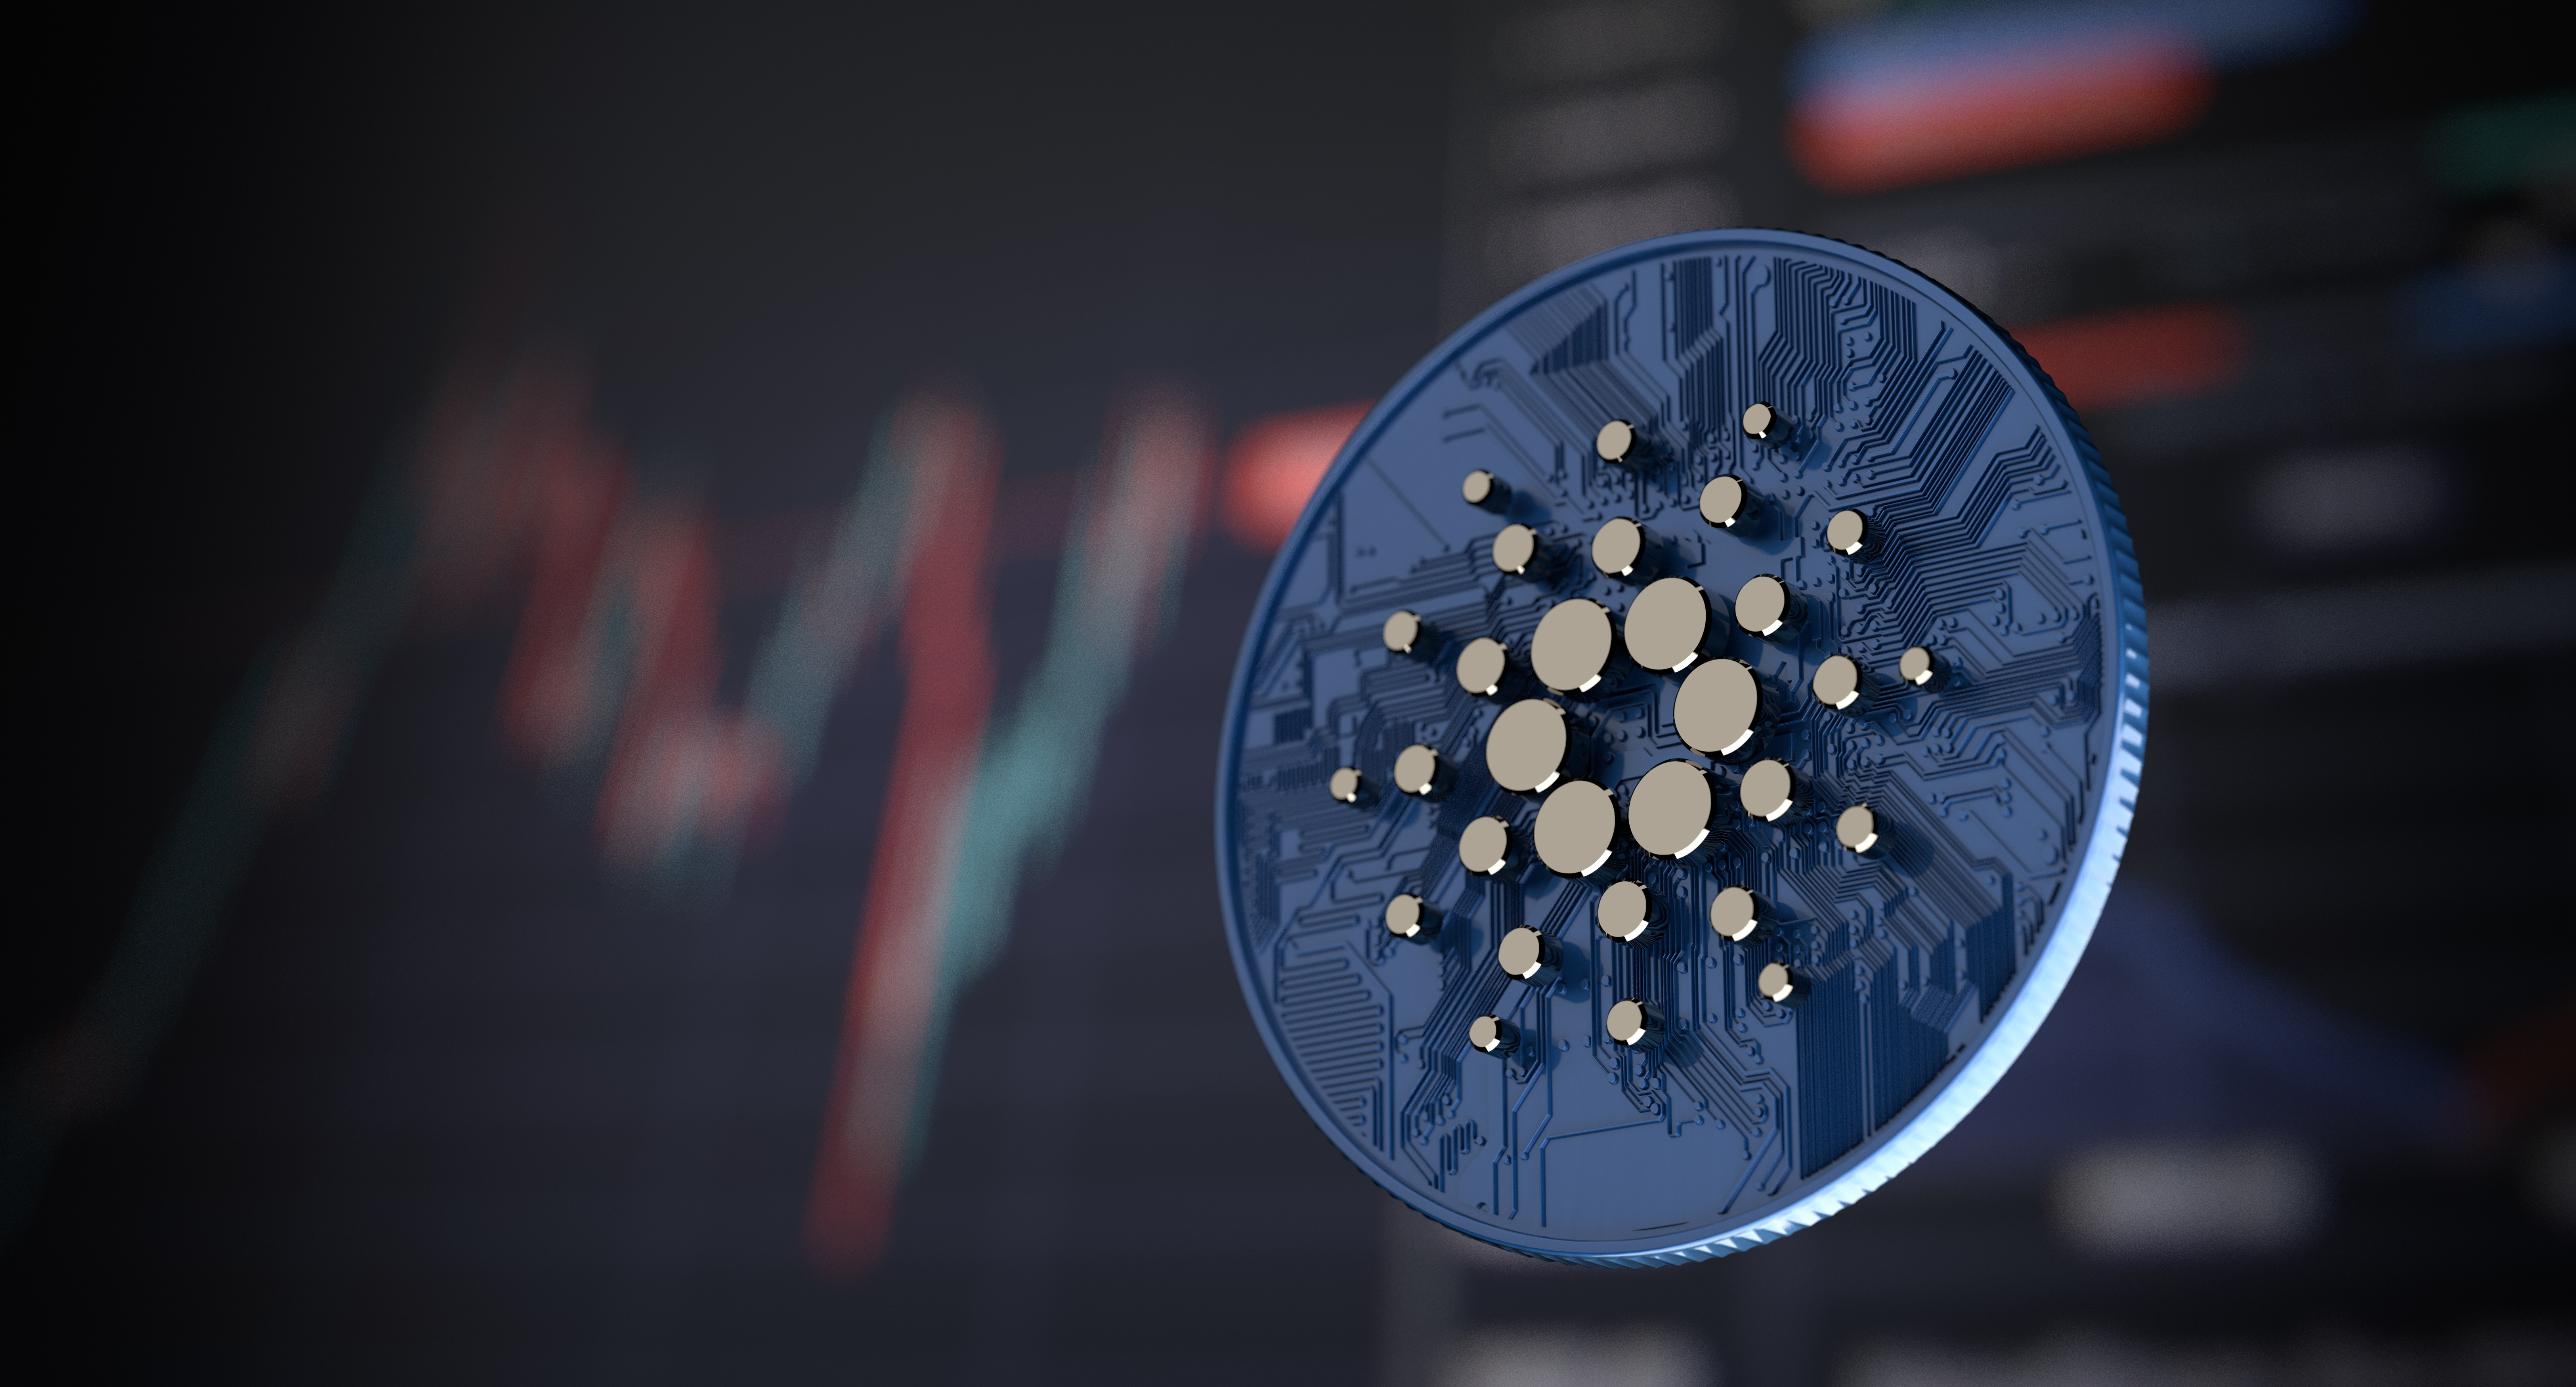 Cardano (ADA) Price Rally Is Far From Over, Heres Why